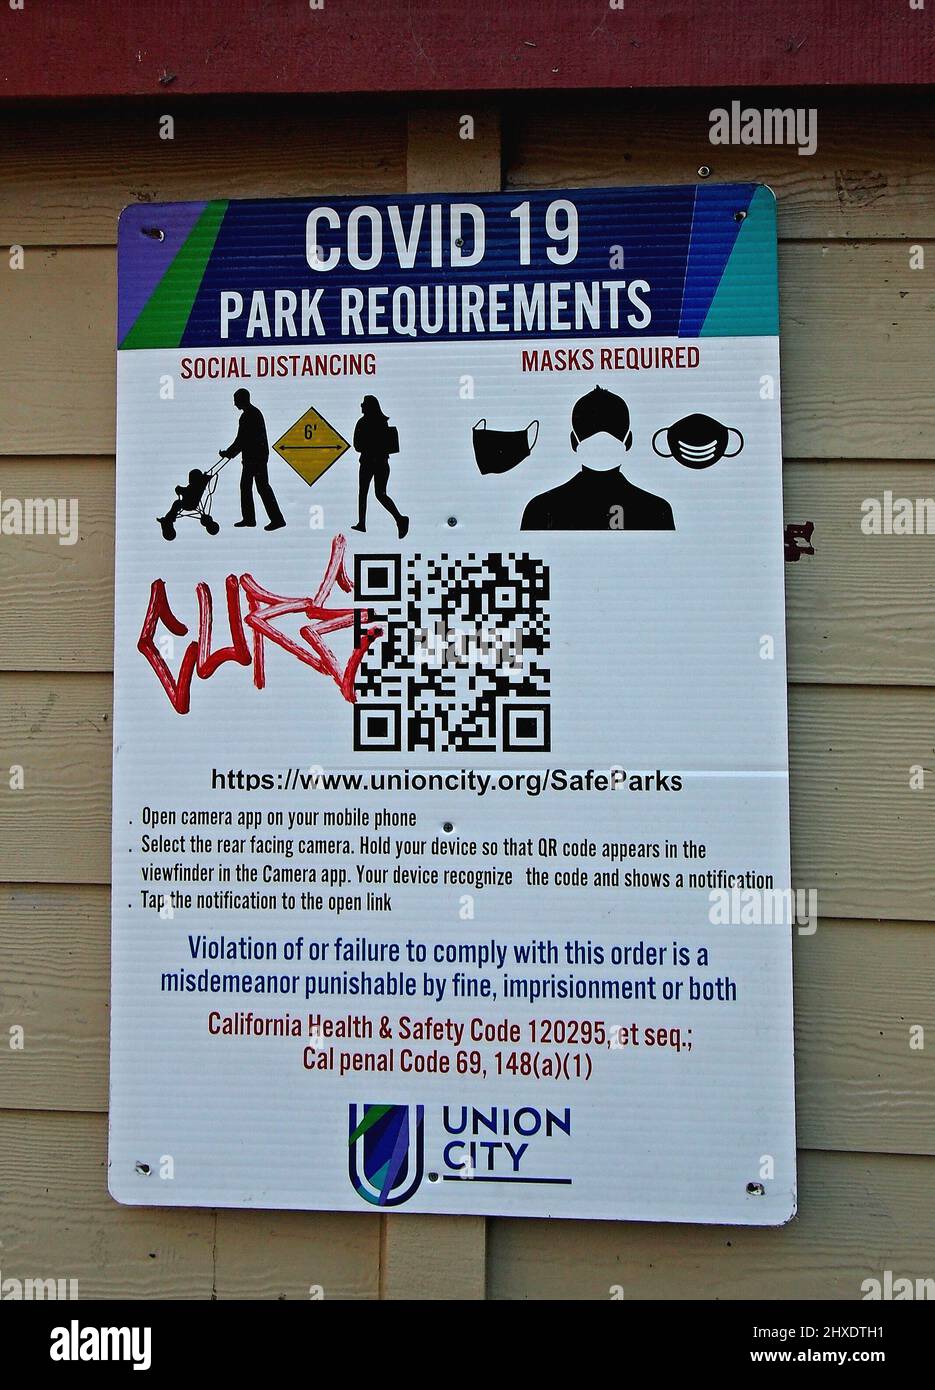 Covid 19 park requirements sign in Cann Park, Union City, California Stock Photo